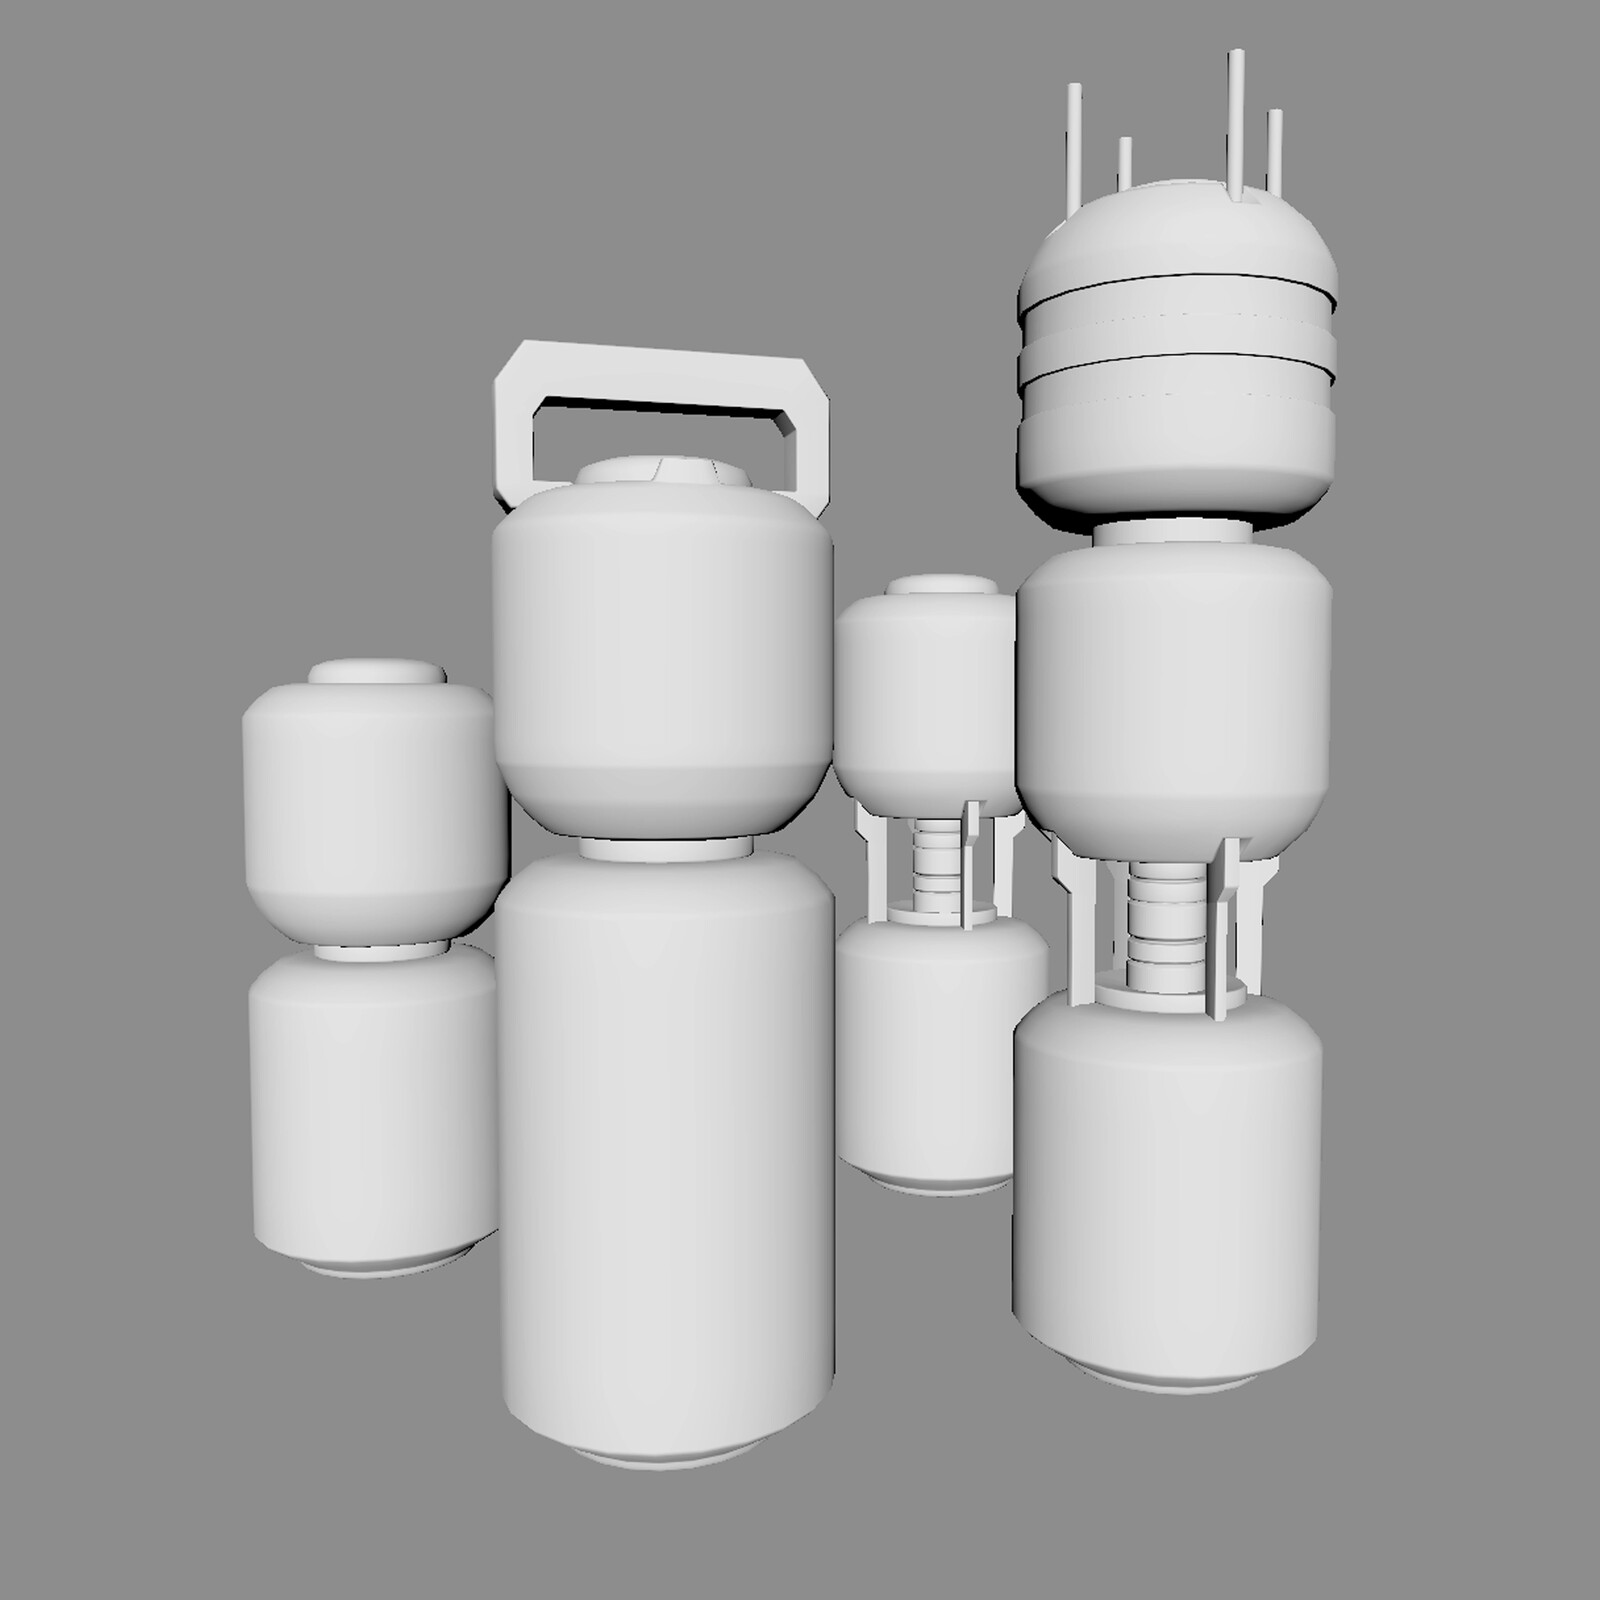 Science fiction battery cells for a 3D CG game/animation short. low poly game ready models.